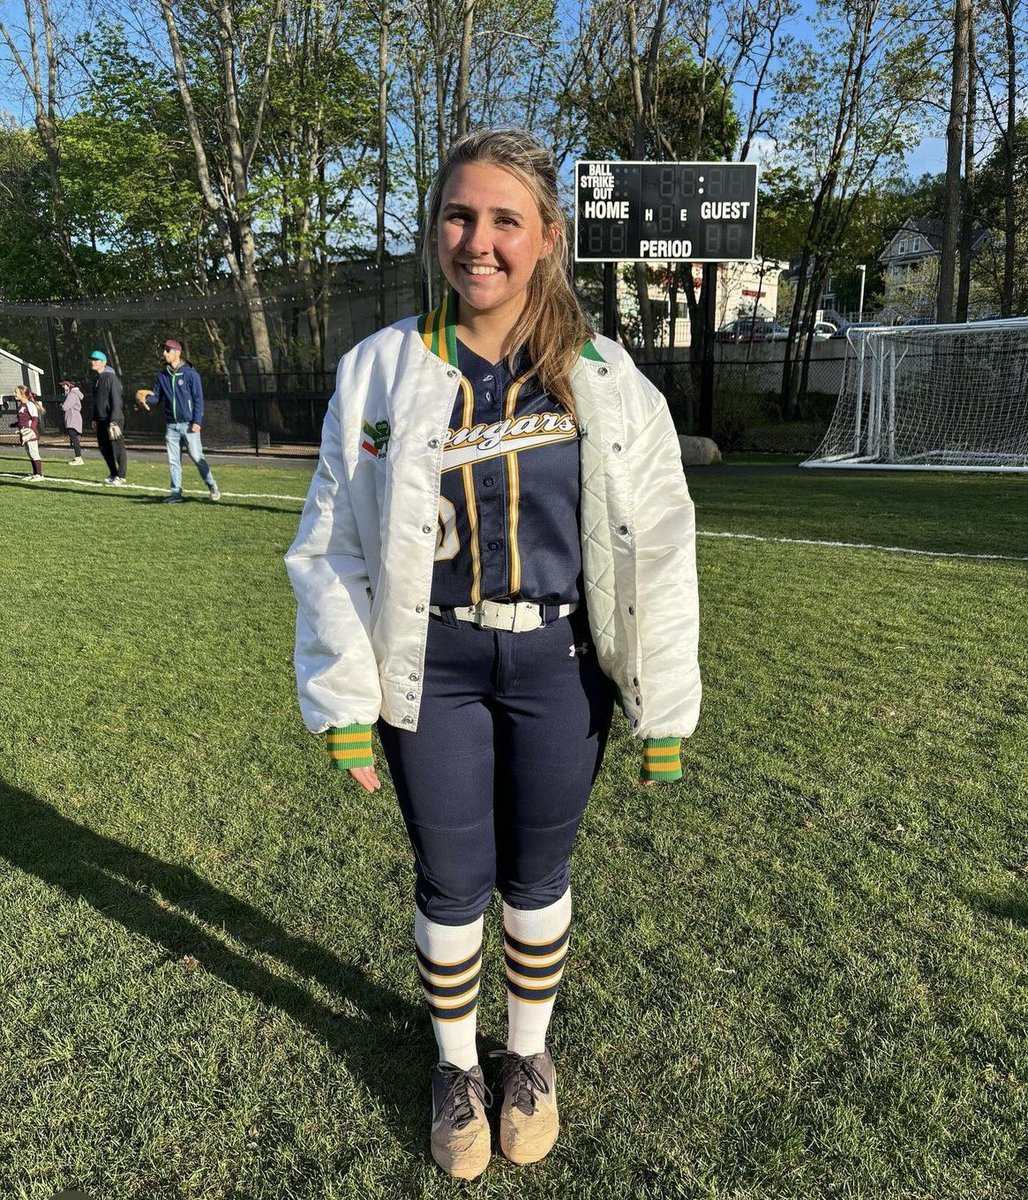 FINAL AC9 Spellman8. Cougars are 9-3. SRLucyHogan 2/2 3 stolen bases. SOCamRose crucial SAC fly.SRCAPT MaddieConnelly big RBI single. Jacket goes to SRCAPTJacqui Murdock for her shut down D and her composure in a tight game. @GlobeSchools @camkerry7 @BostonHeraldHS @AC_Athletics